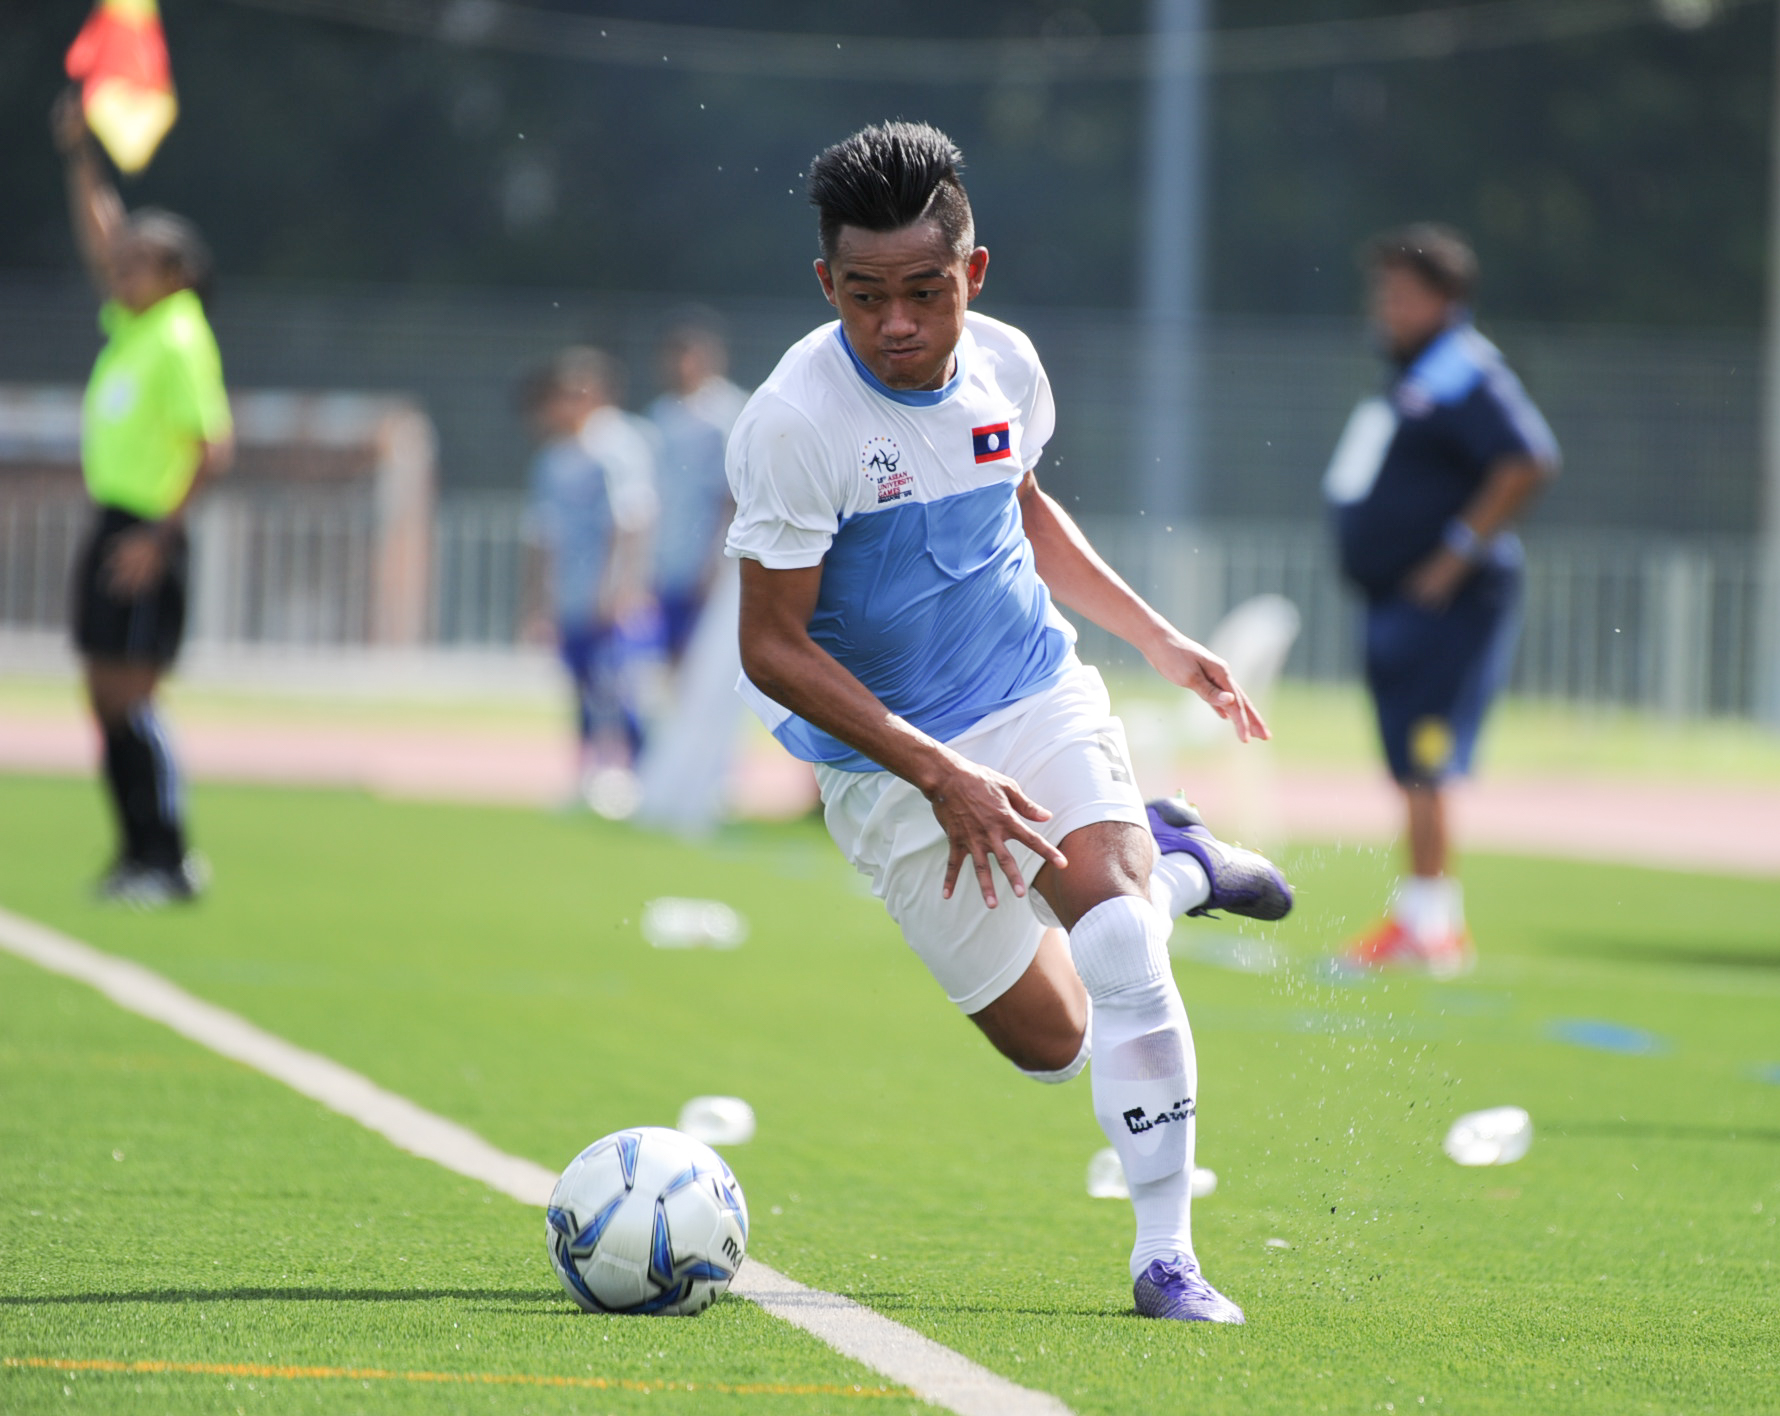 A Laotian player keeps the ball in play during the soccer competition of the ASEAN University Games at the Nanyang Technological University.